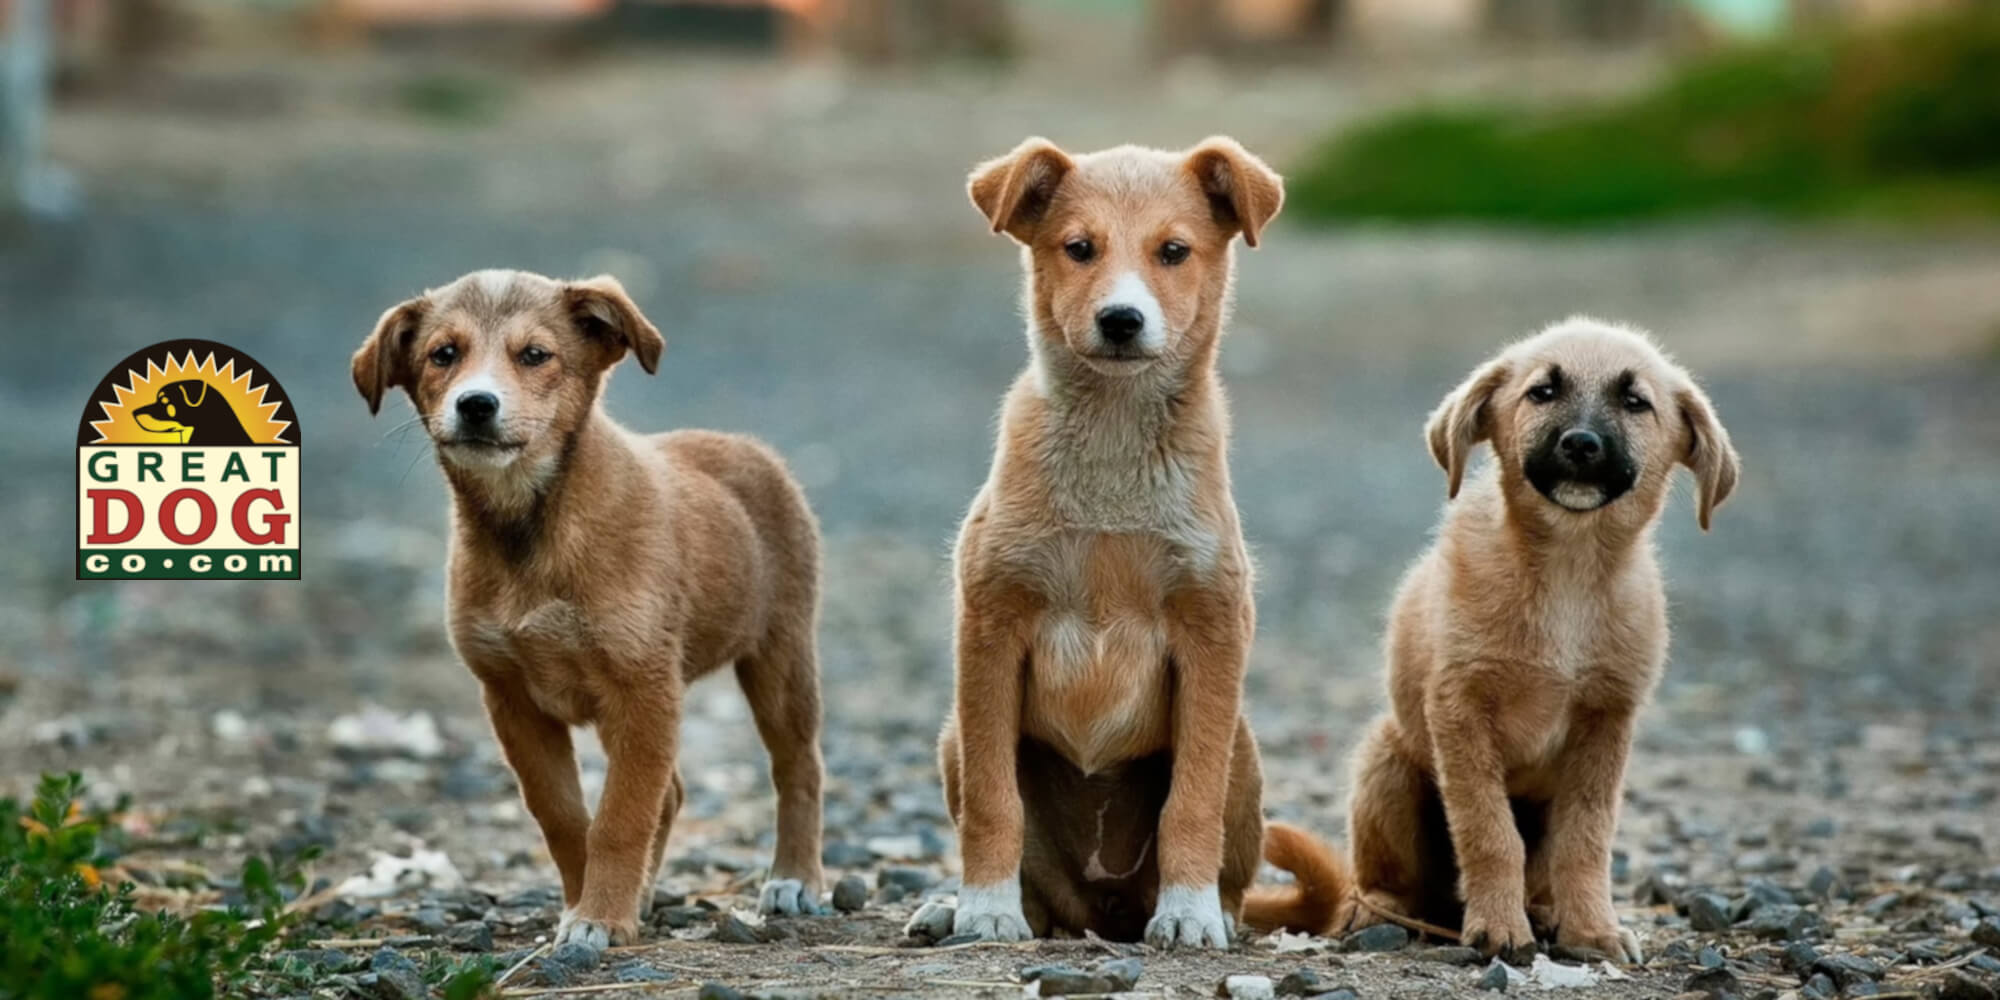 great-dog-co-home-page-image-of-three-terriers-with-text-healthy-dog-teats-and-chews